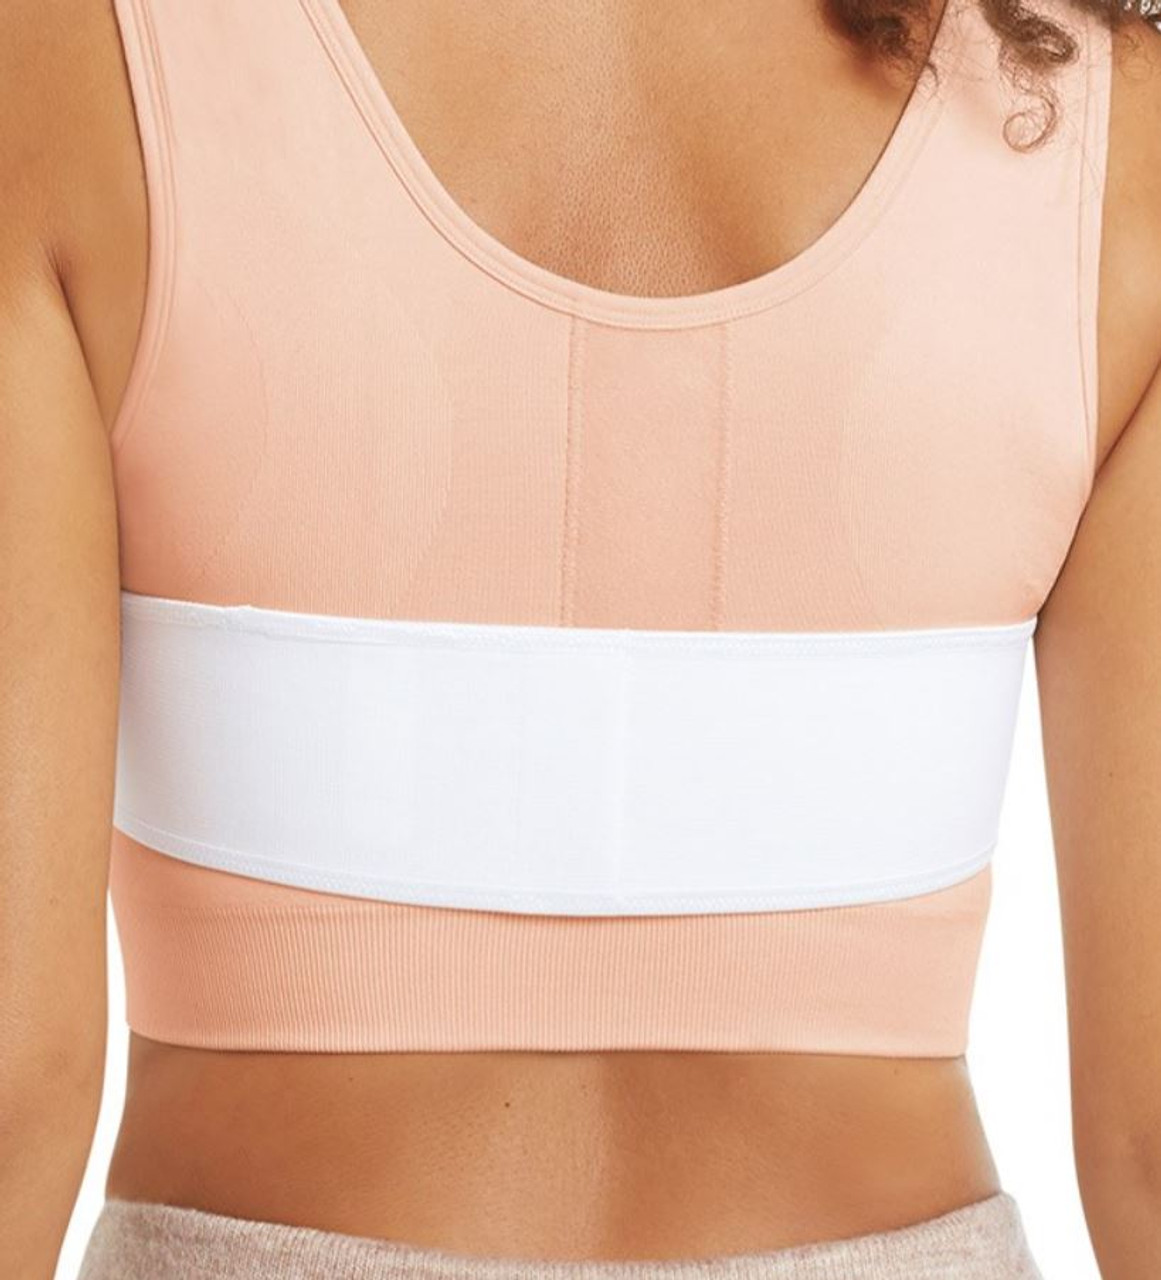 Surgery Recovery  Compression Belt for Implant stabilization - GraceMd - Mastectomy  Bras & Breast Forms